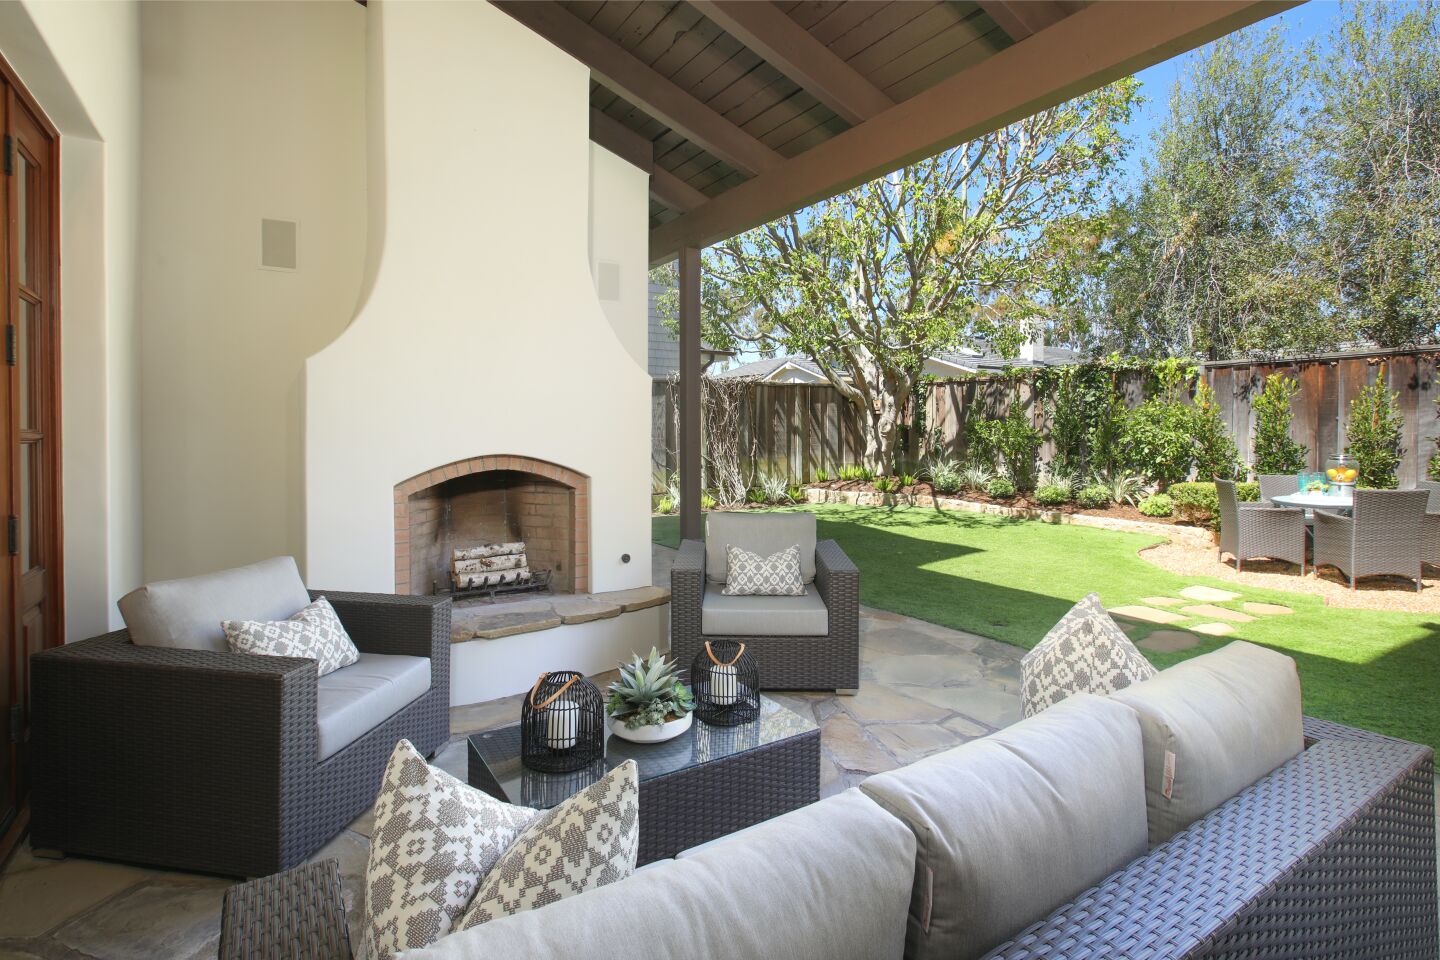 The backyard has a patio with fireplace and a turf lawn.